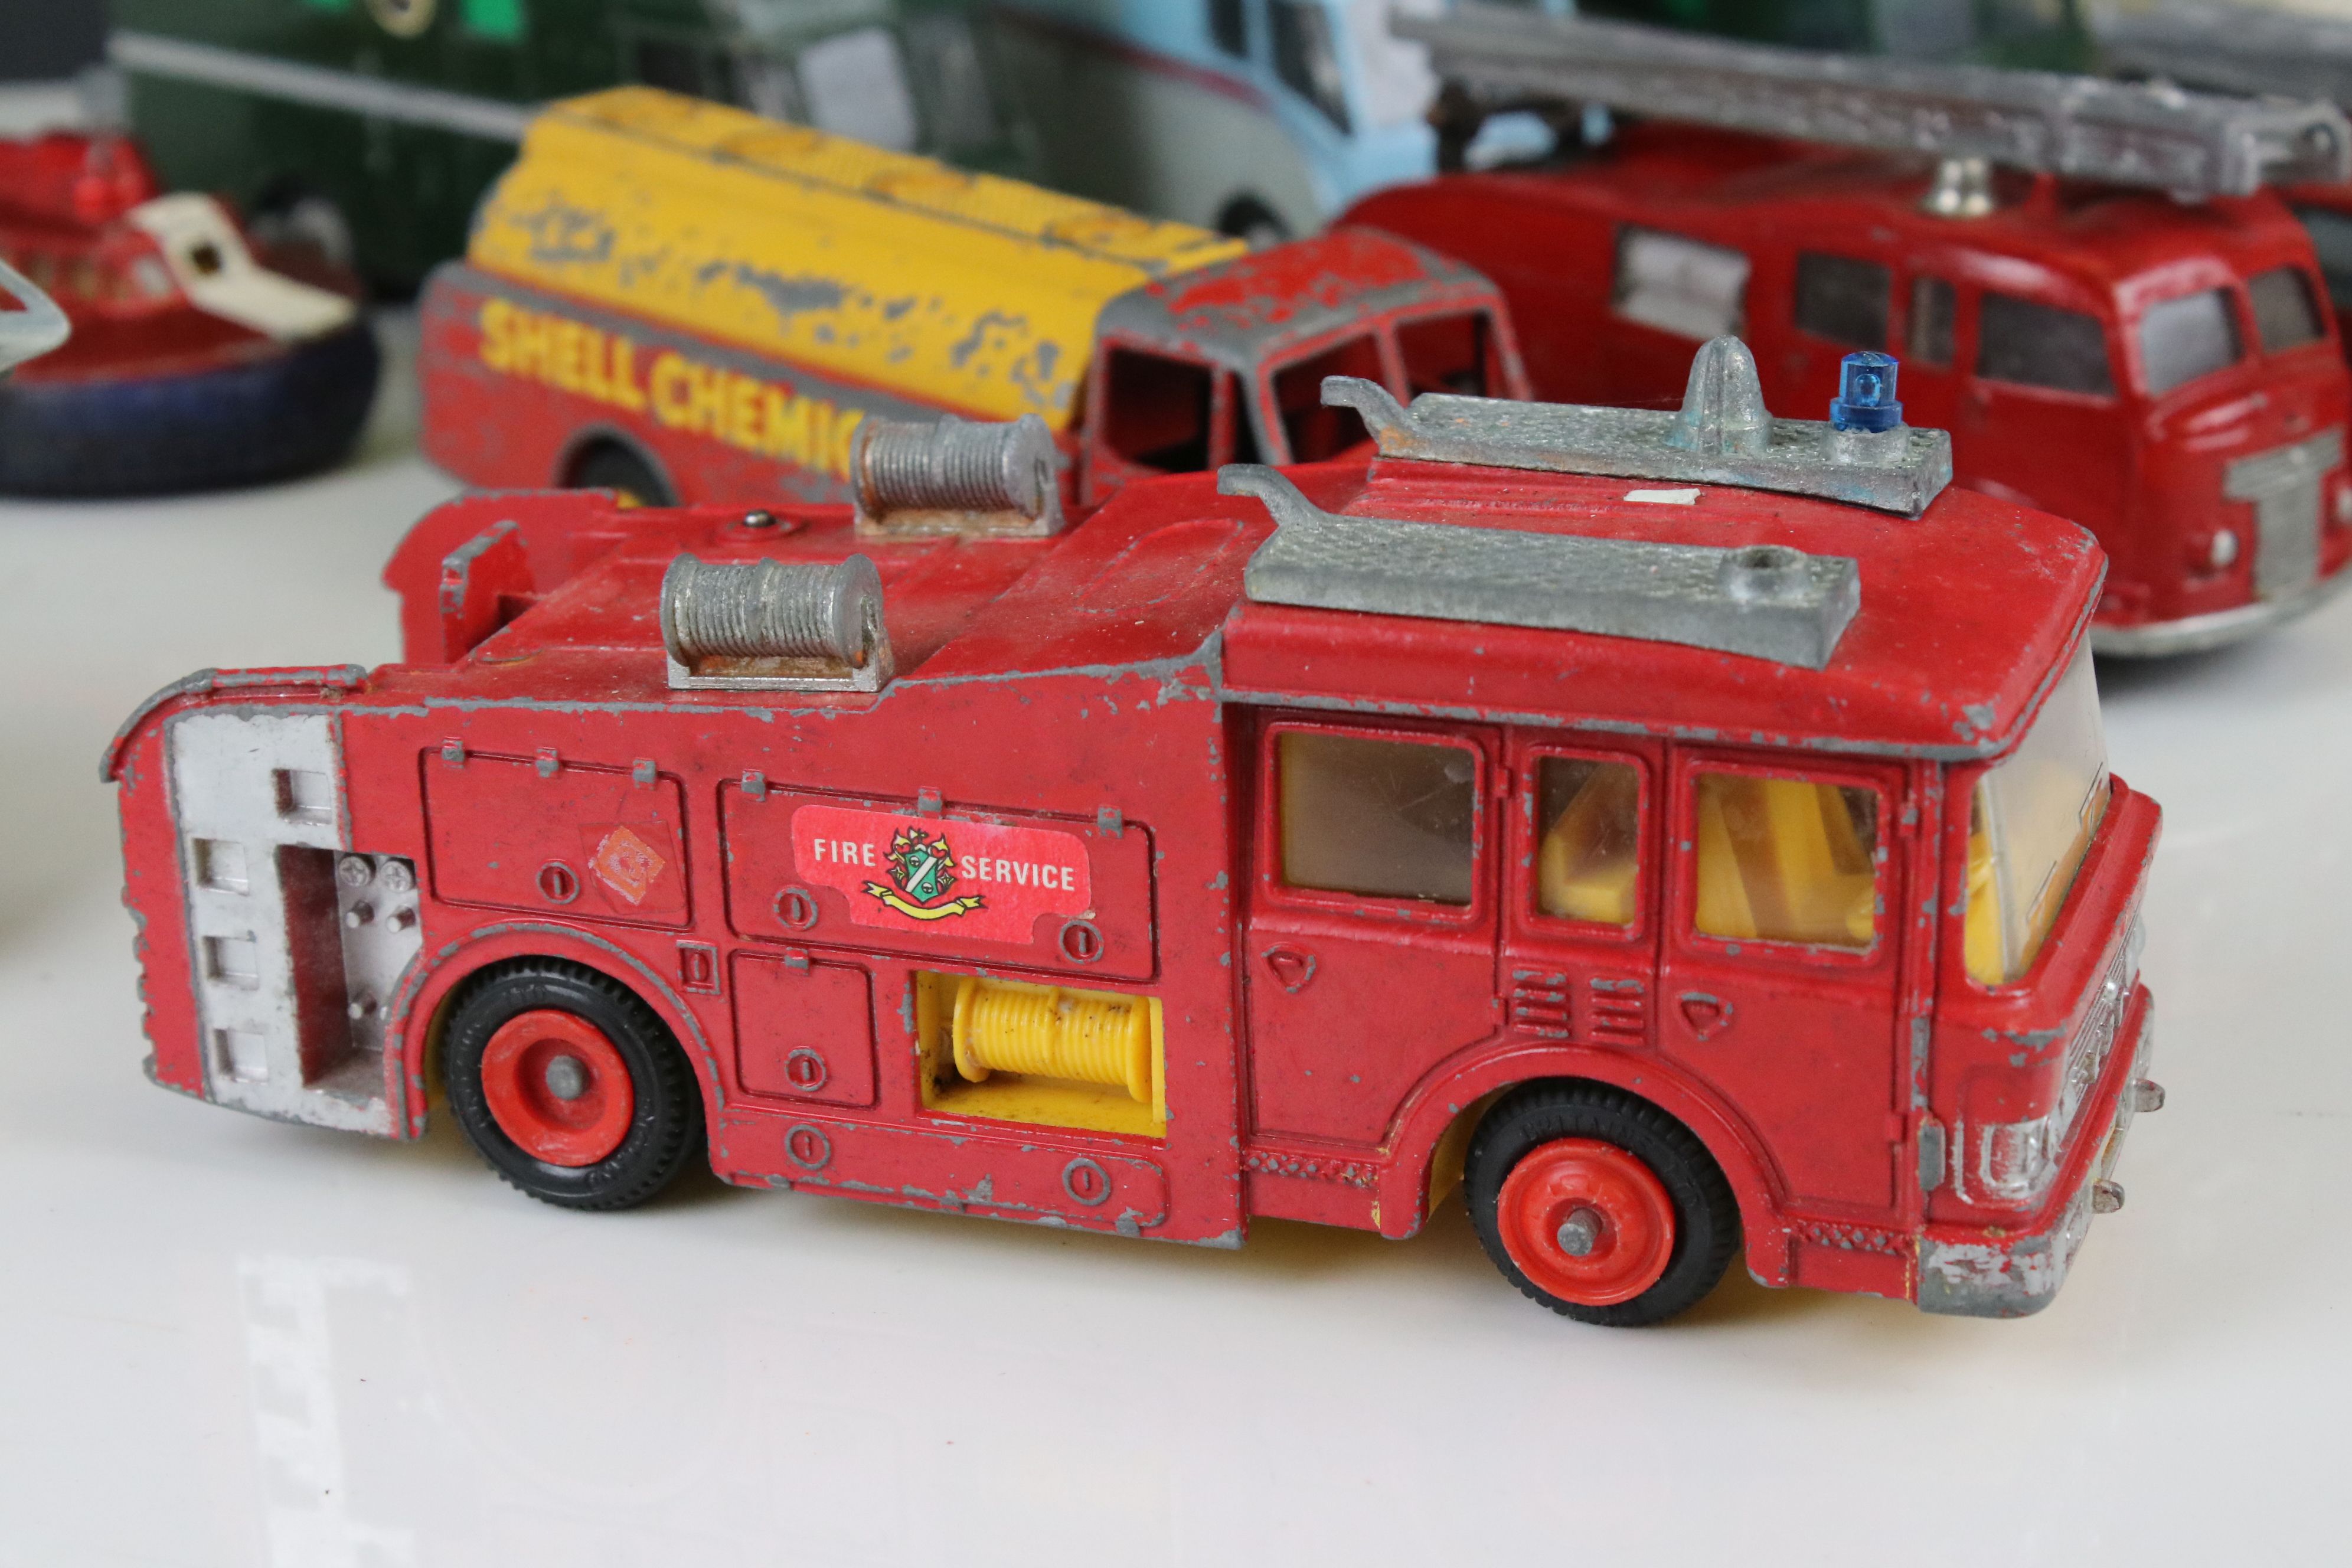 15 play worn mid 20th diecast models to include TV Mobile Control Room, 967 BBC TV Mobile Control - Image 6 of 15